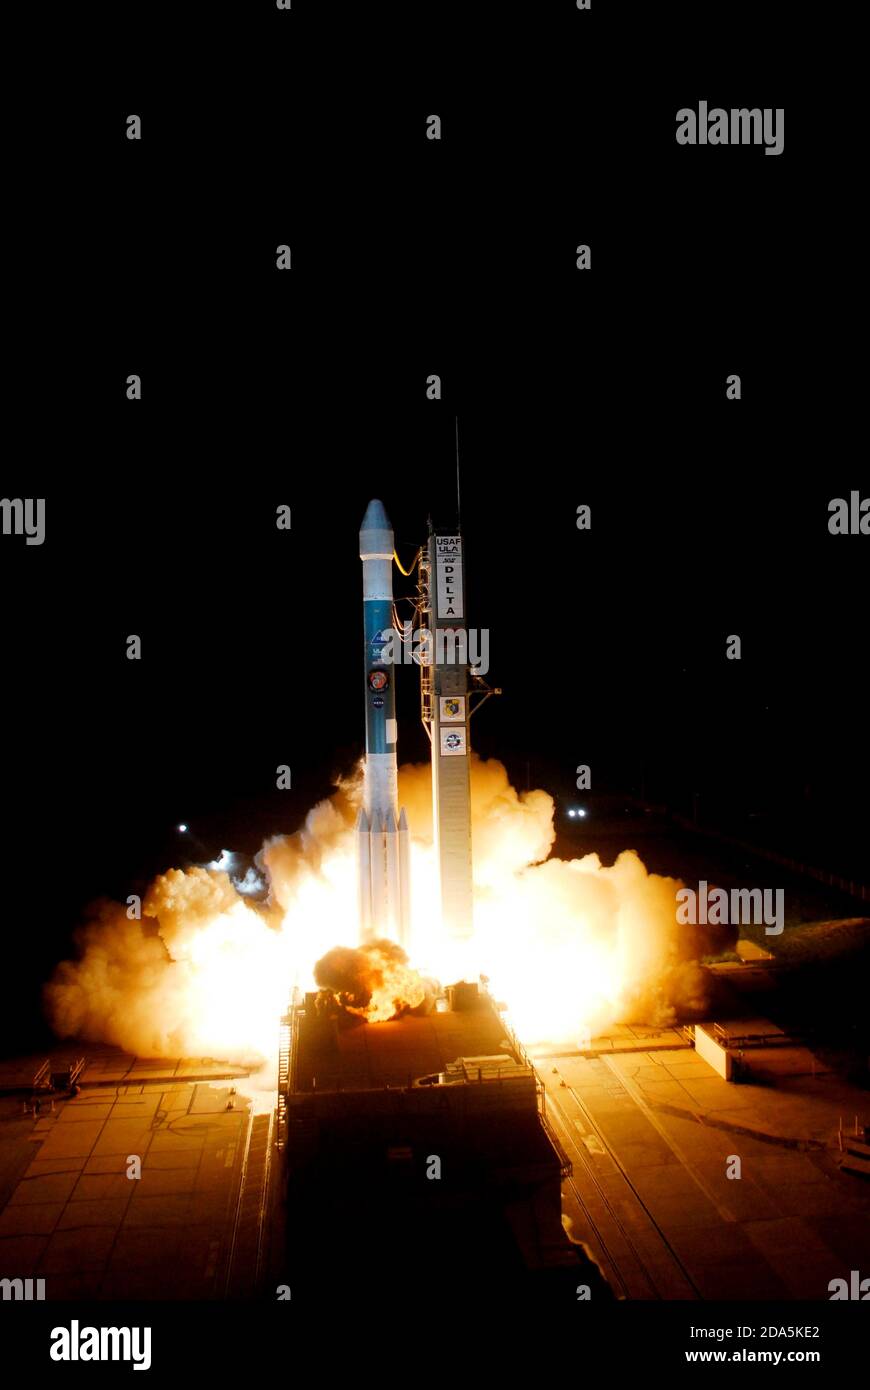 KENNEDY SPACE CENTER, FL, USA - 04 August 2007 - NASA's Phoenix Mars Lander makes a dramatic start on its mission to Mars aboard a Delta II 7925 rocke Stock Photo